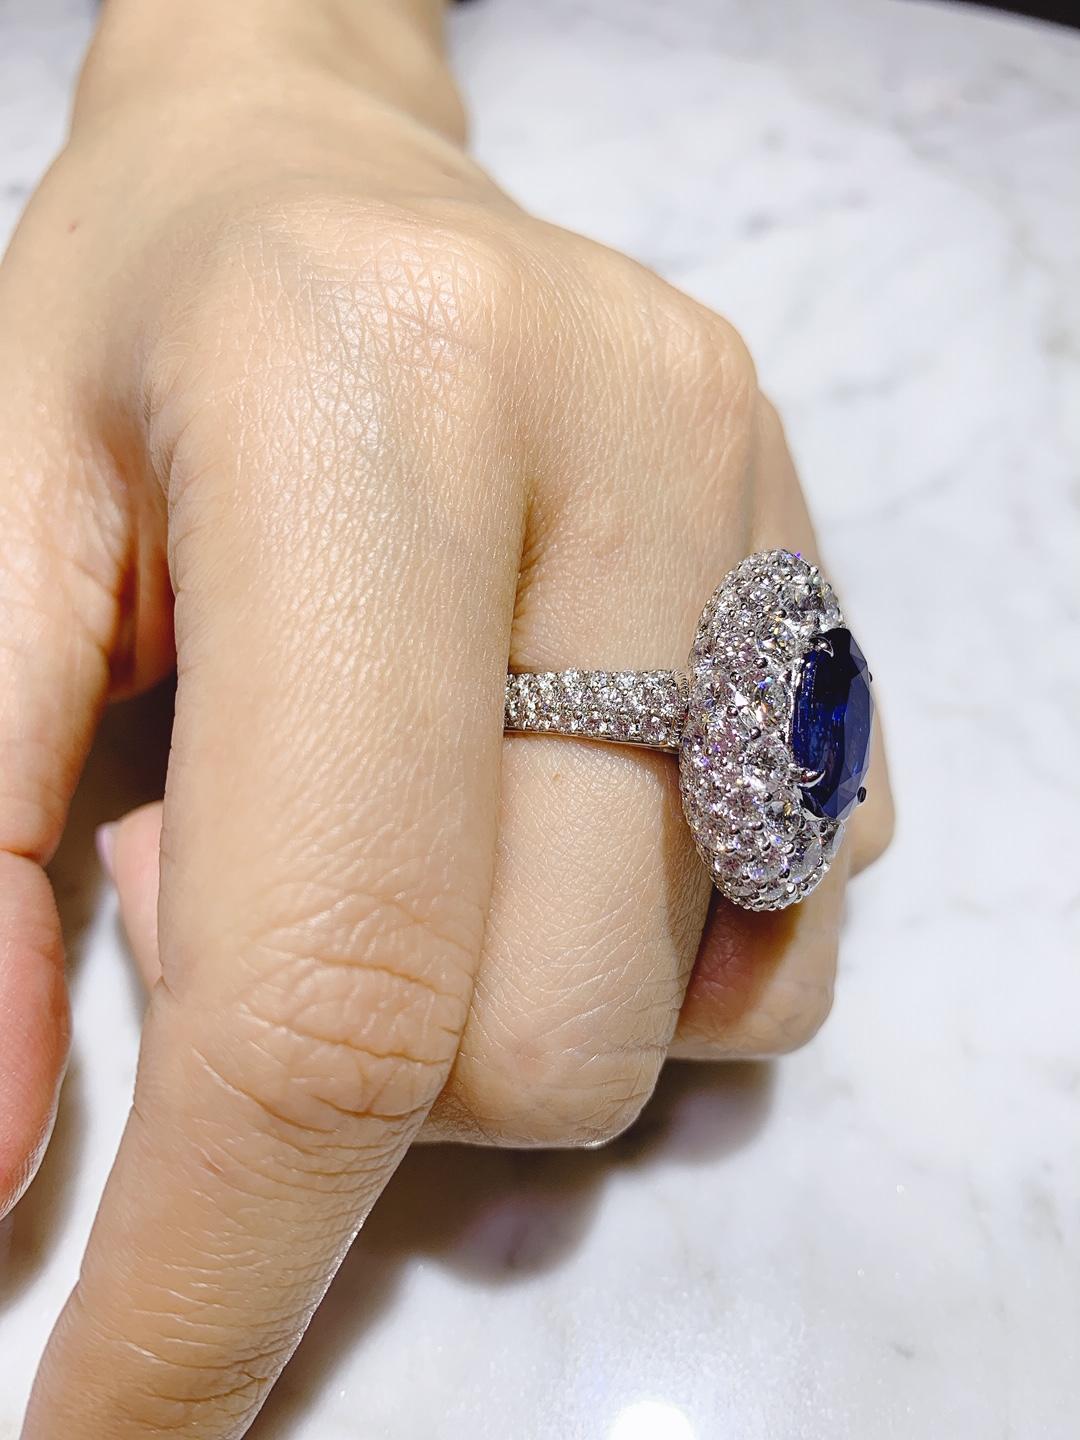 GRS Certified 6.24 Carat Ceylon Blue Sapphire Ring 'Heated' For Sale 2